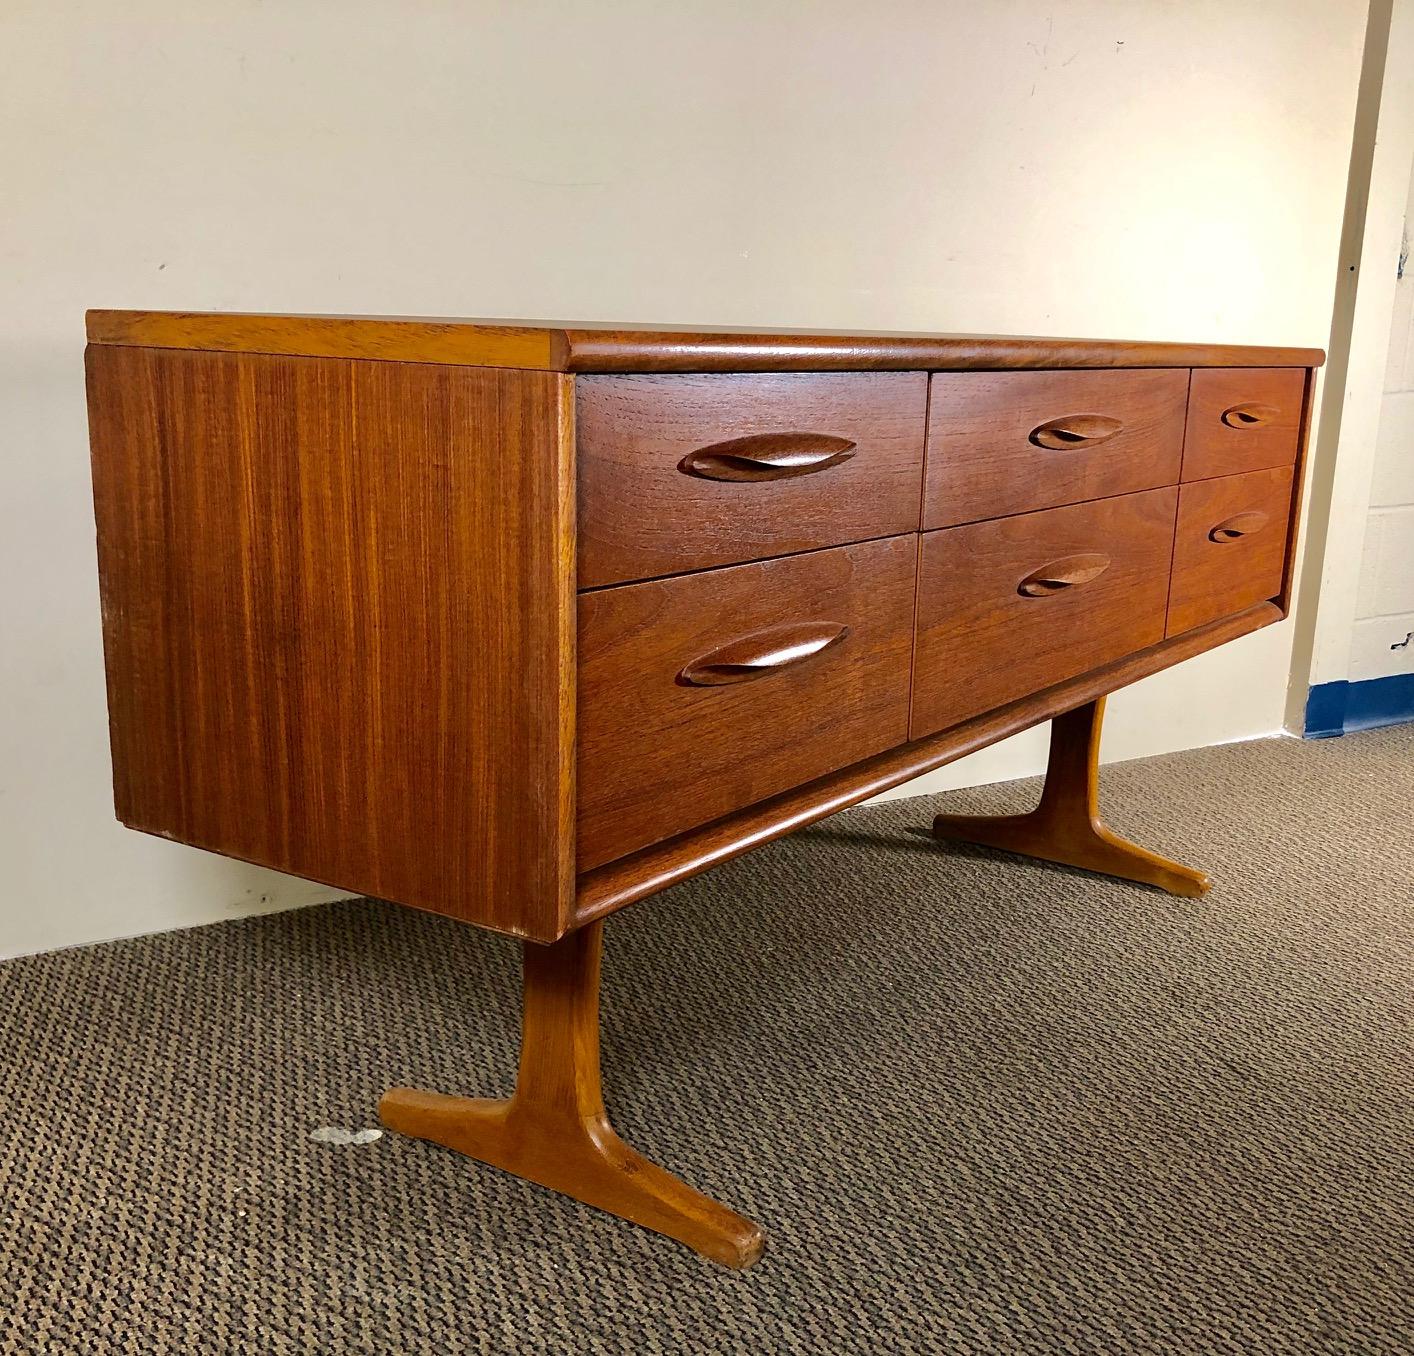 This beautiful 6 drawer dresser with was made by Austinsuite of England.

Featuring sculpted beech legs and teak handles.

Very nice vintage condition. The top was stripped and oiled at some point. The rest of the piece still has the original